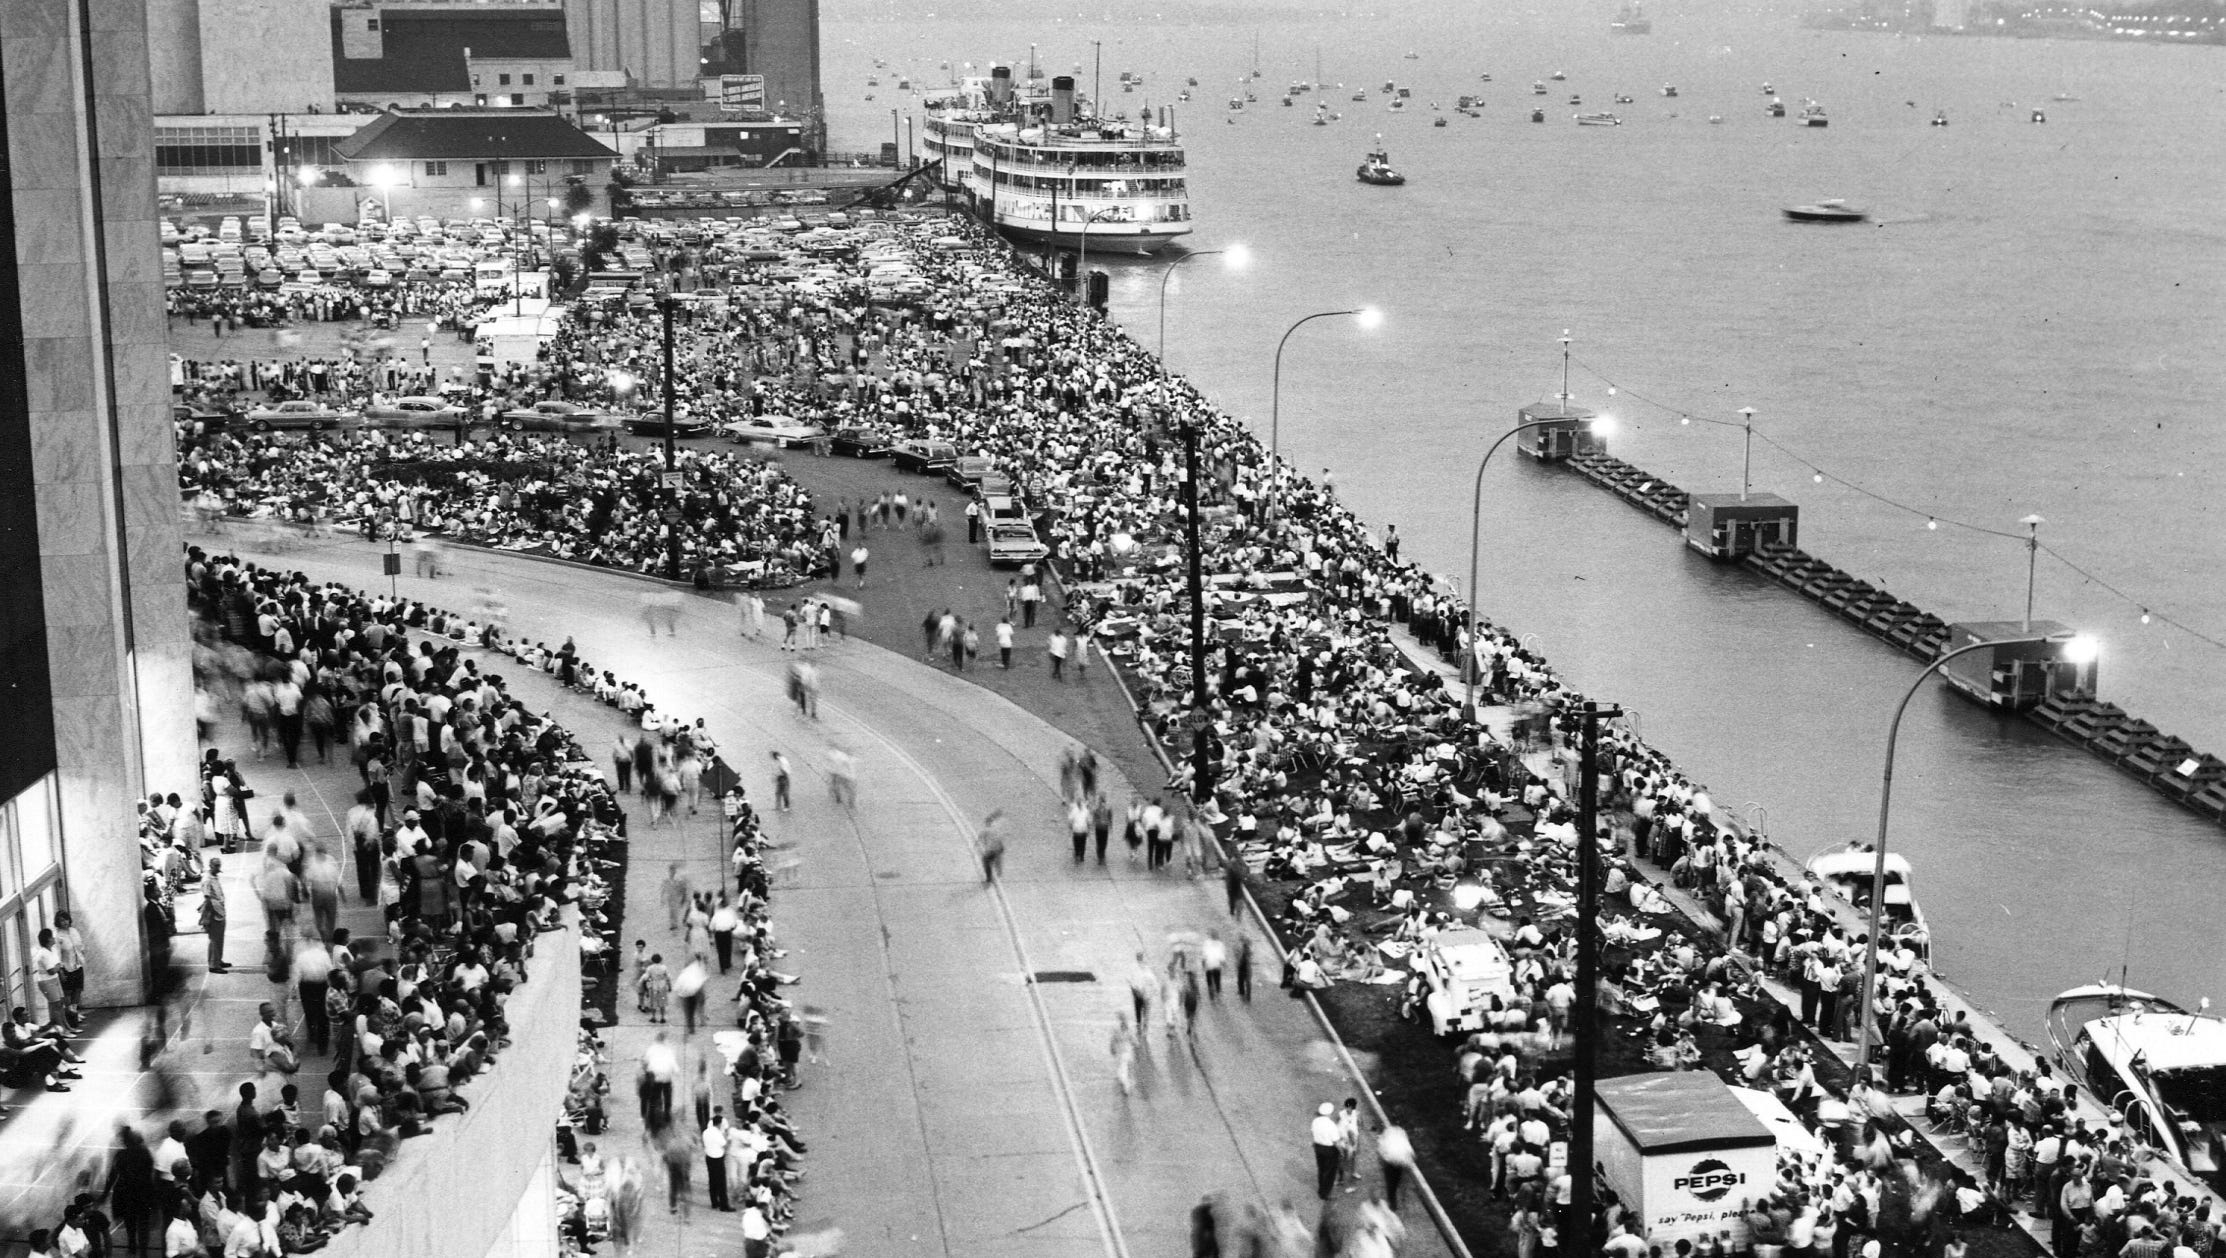 Crowds gather outside Cobo along the Detroit River for the Freedom Festival on July 2, 1964.